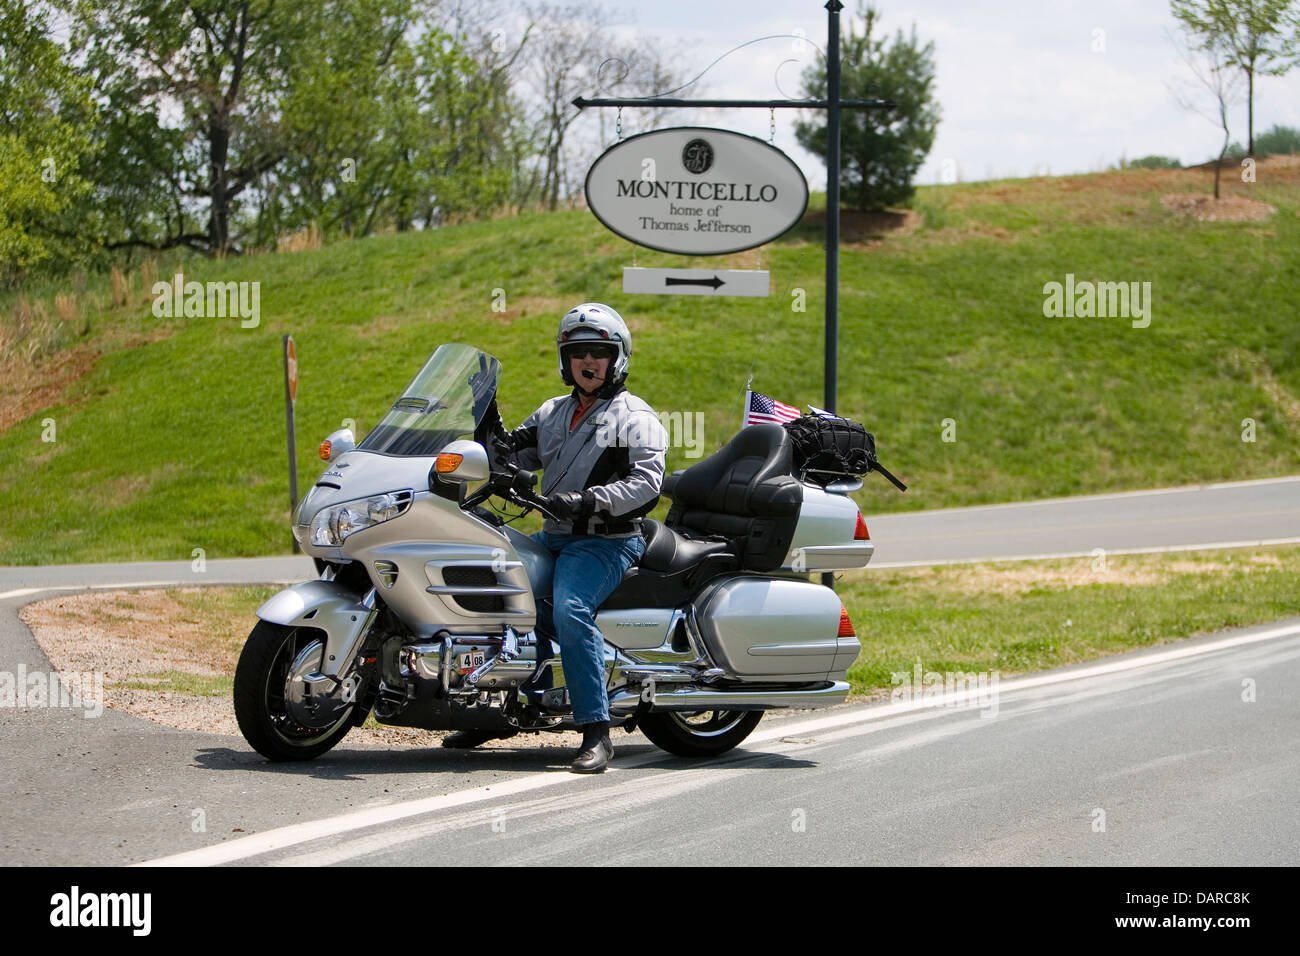 An adult male on a Honda Goldwing motorcycle gestures in front of a sign for Monticello, Charlottesville, Virginia. Stock Photo